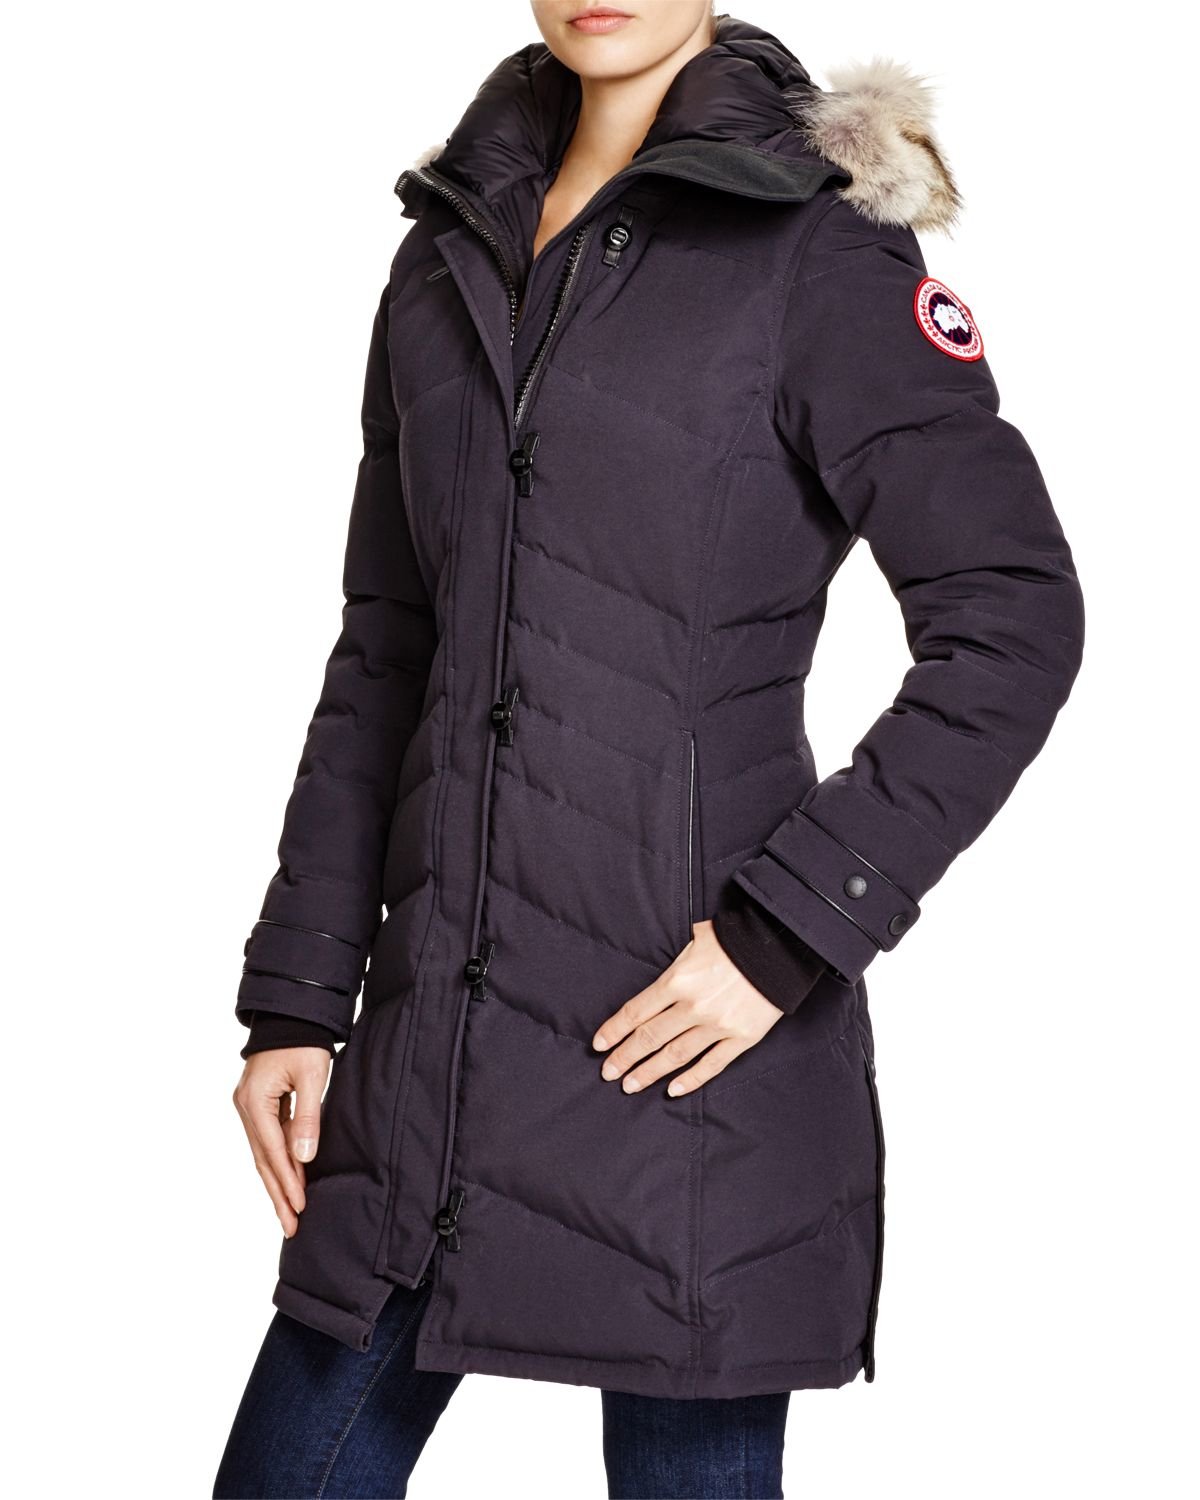 Canada Goose victoria parka outlet discounts - Many Different Styles Canada Goose Expedition Parka London About 5 ...